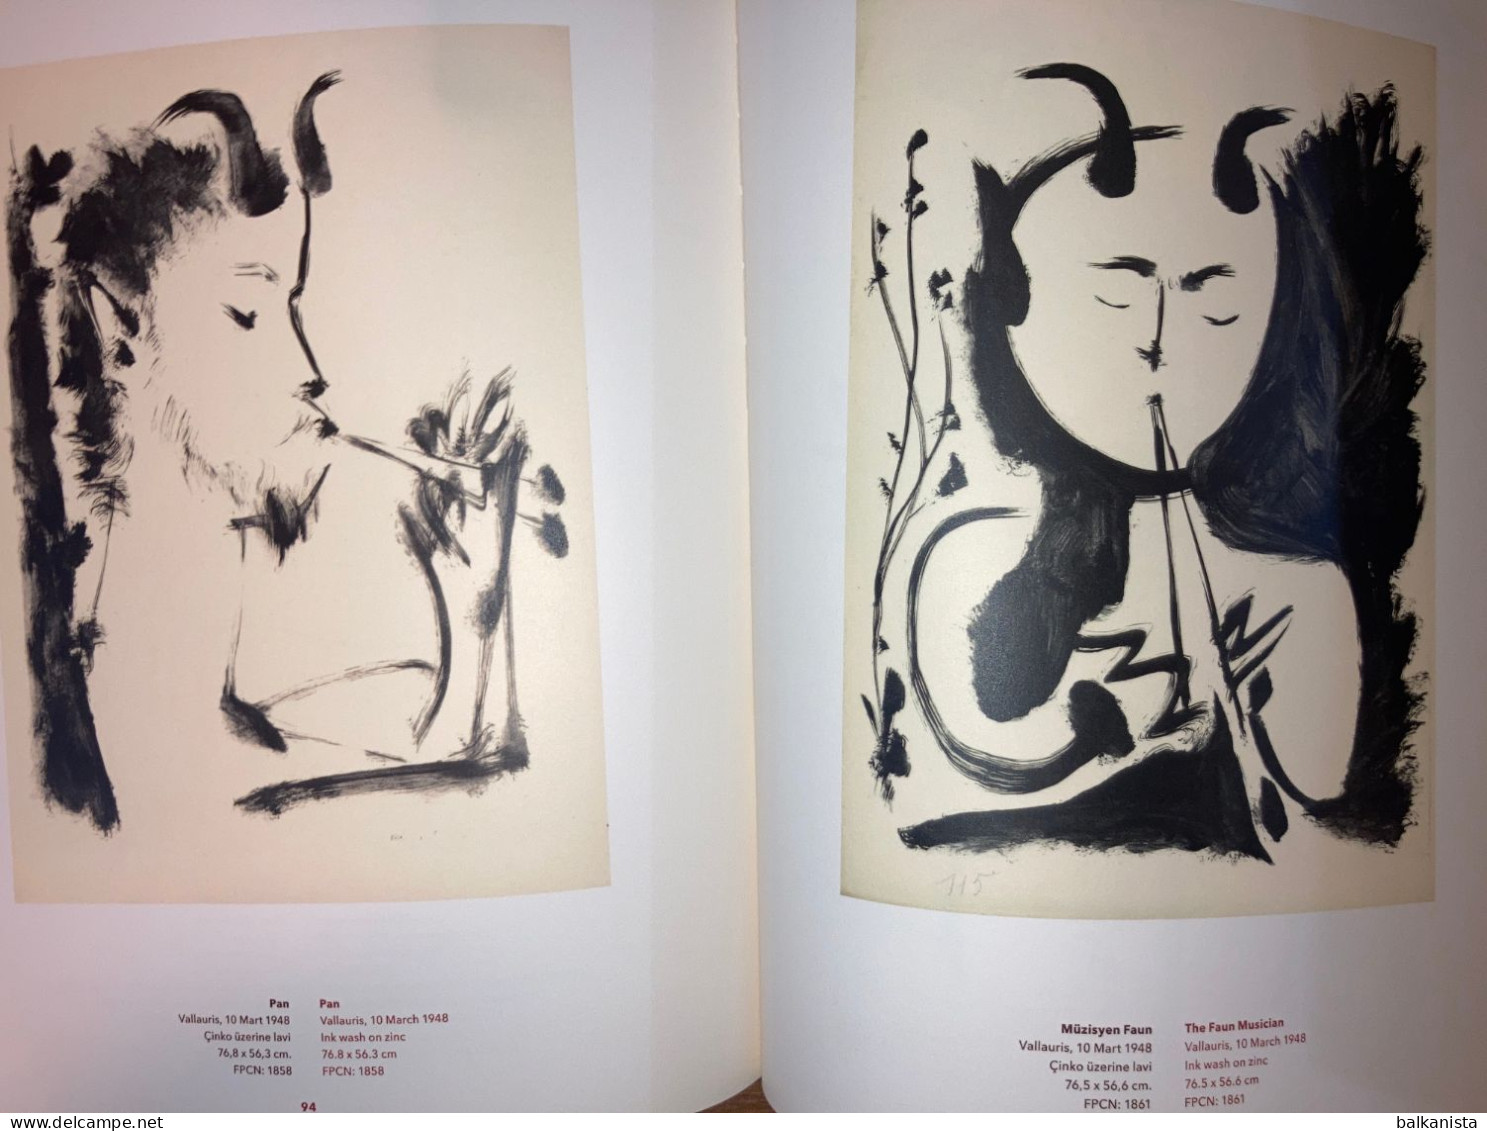 Picasso Engravings and Ceramics from the House of His Birth Painting Exhibition